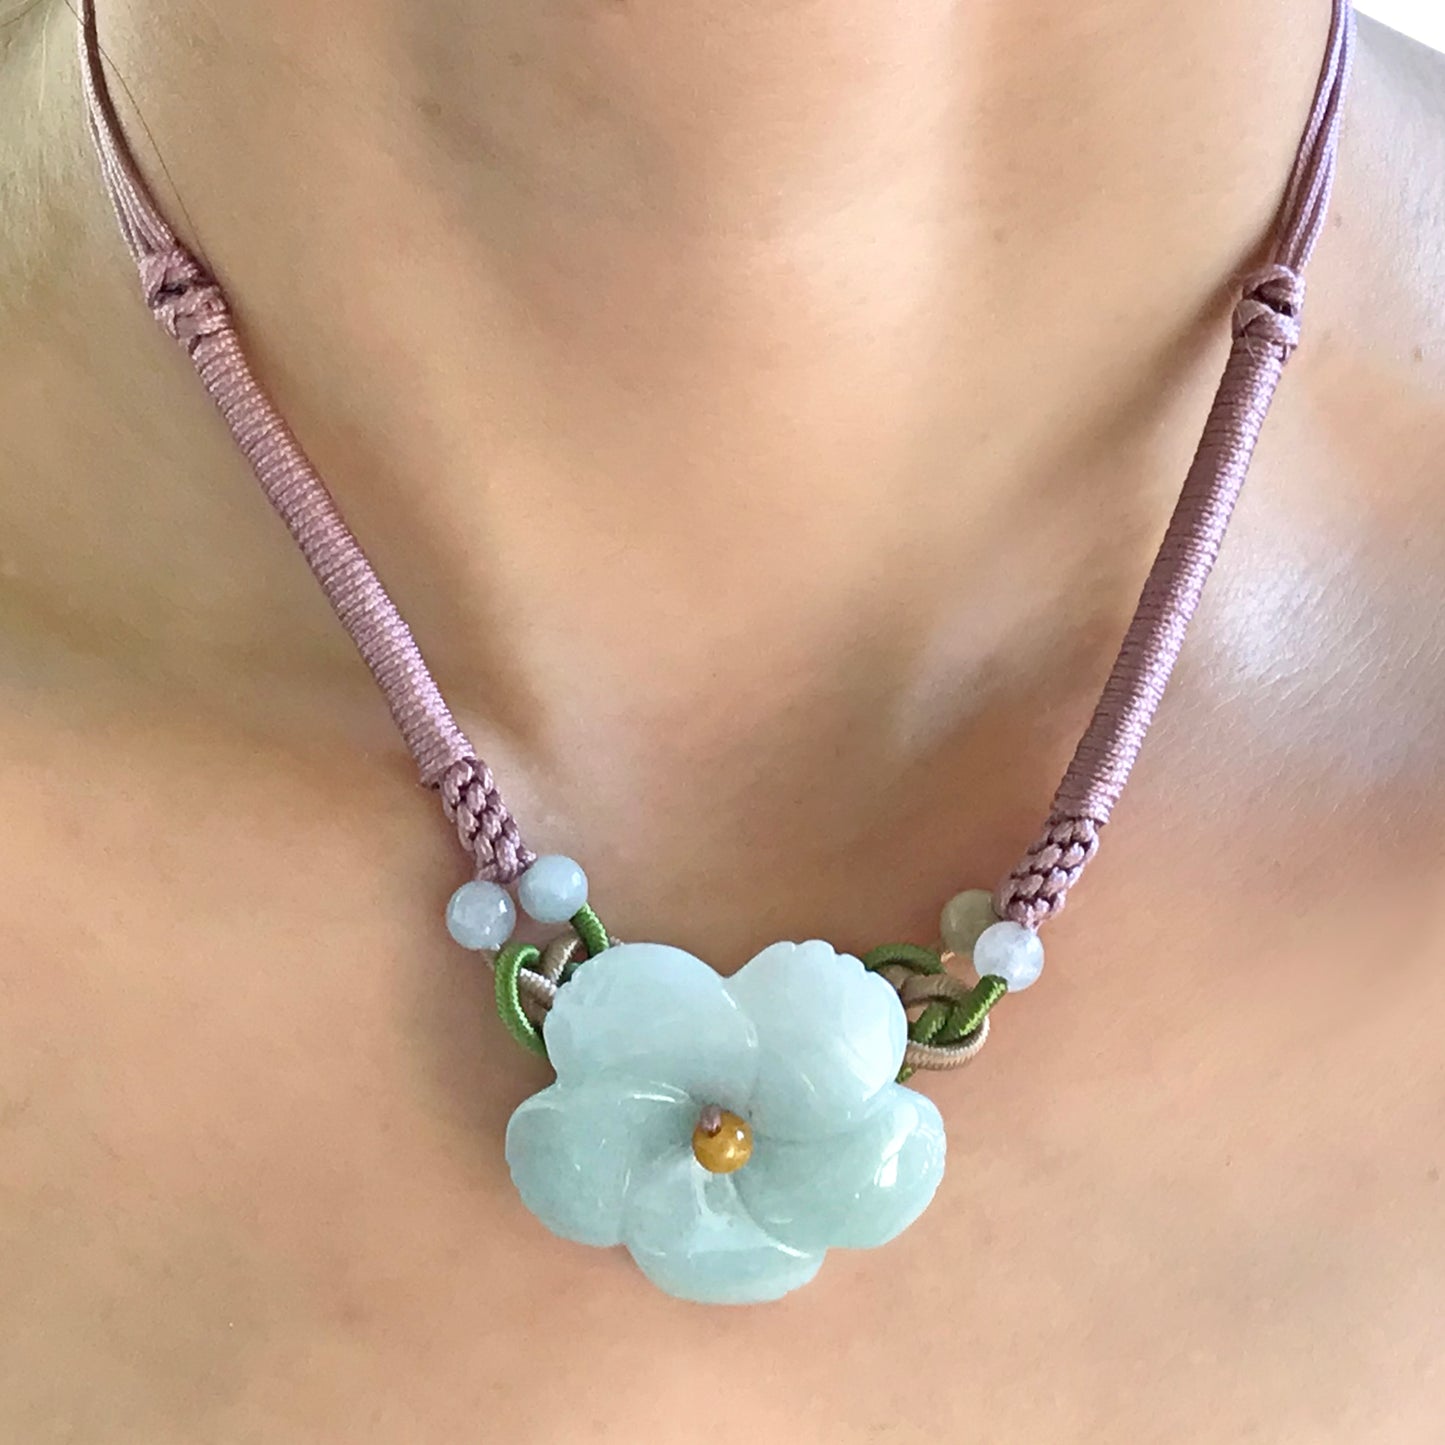 Get the Look You Crave with the Clematis Blossom Jade Necklace with Pink Cord